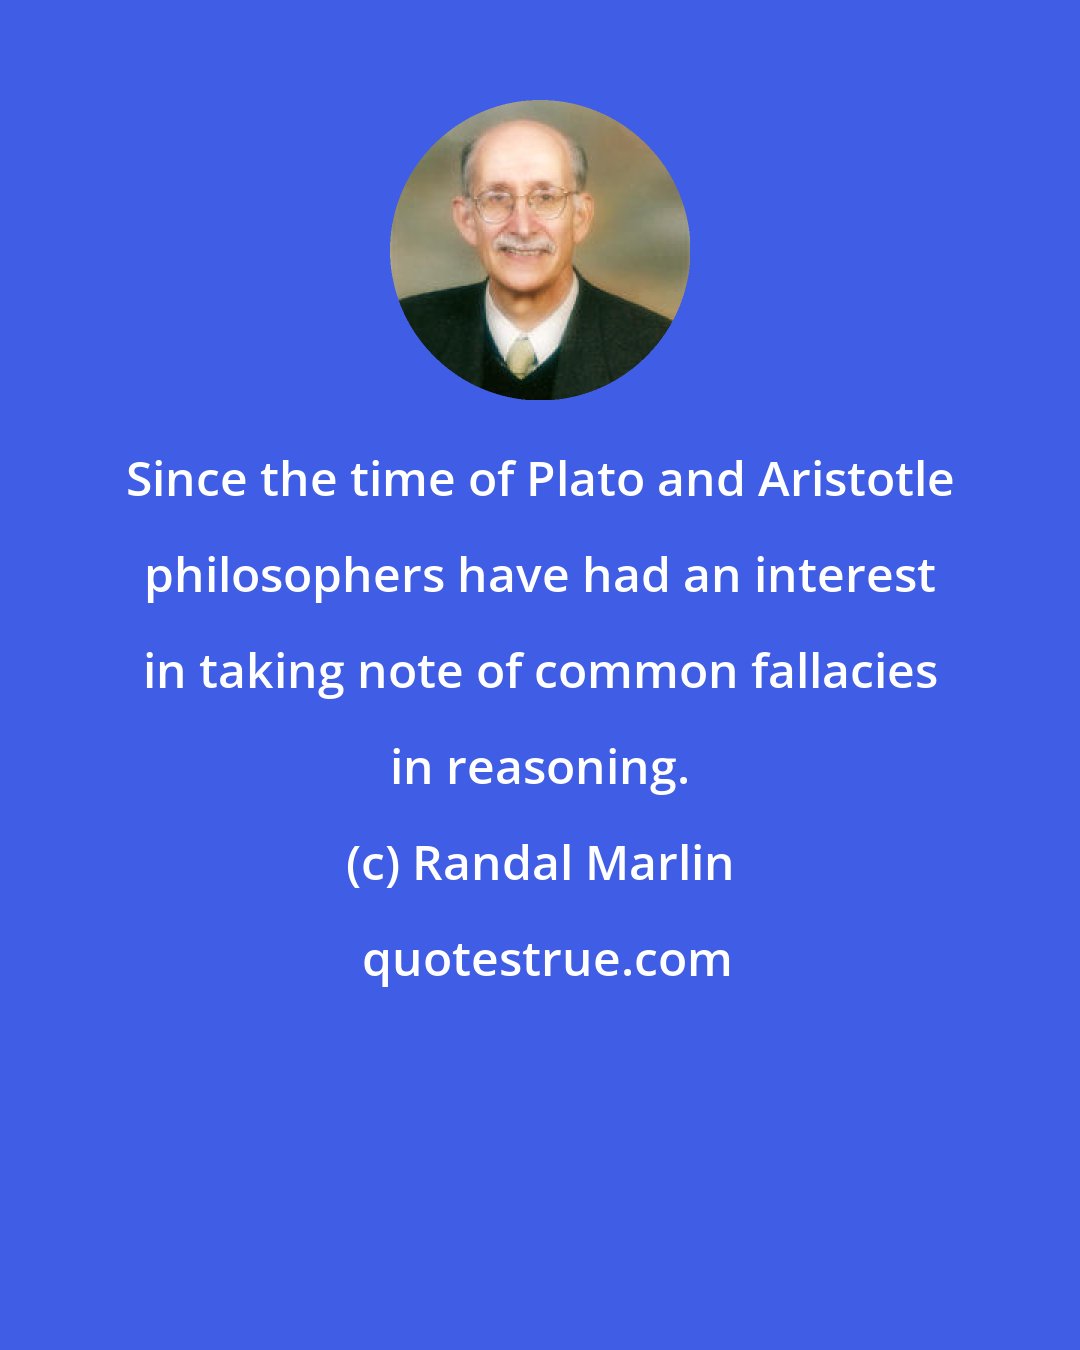 Randal Marlin: Since the time of Plato and Aristotle philosophers have had an interest in taking note of common fallacies in reasoning.